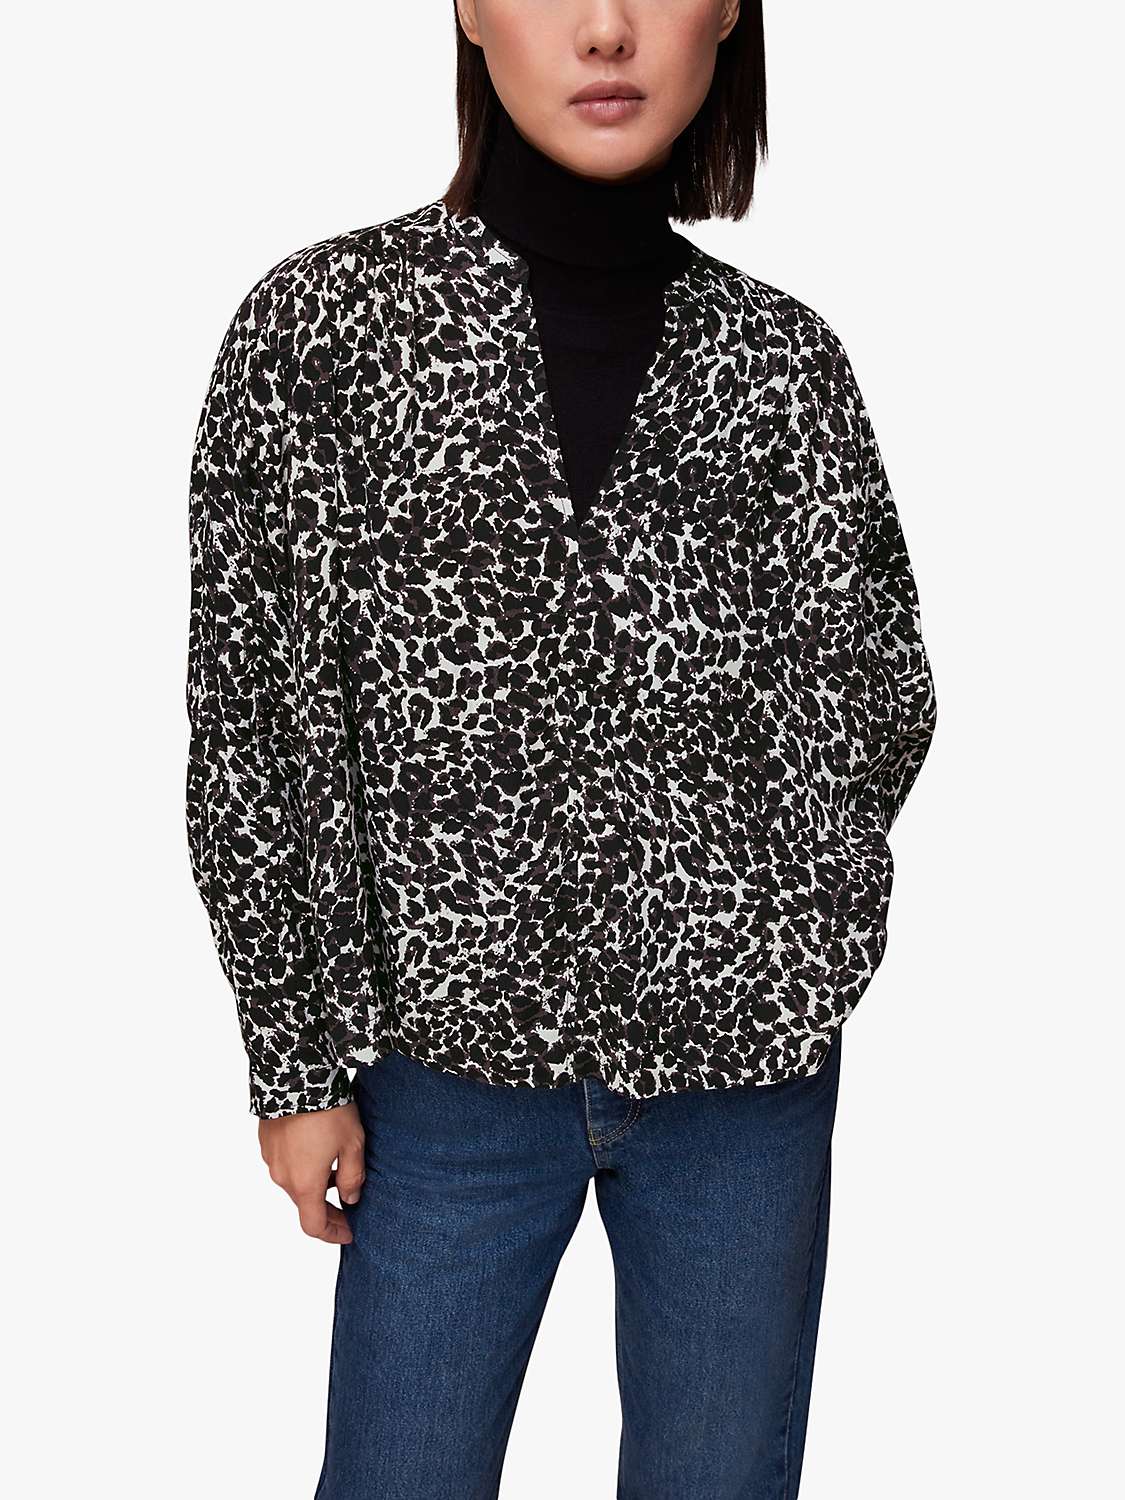 Buy Whistles Shadow Leopard Print Blouse, Black/White Online at johnlewis.com